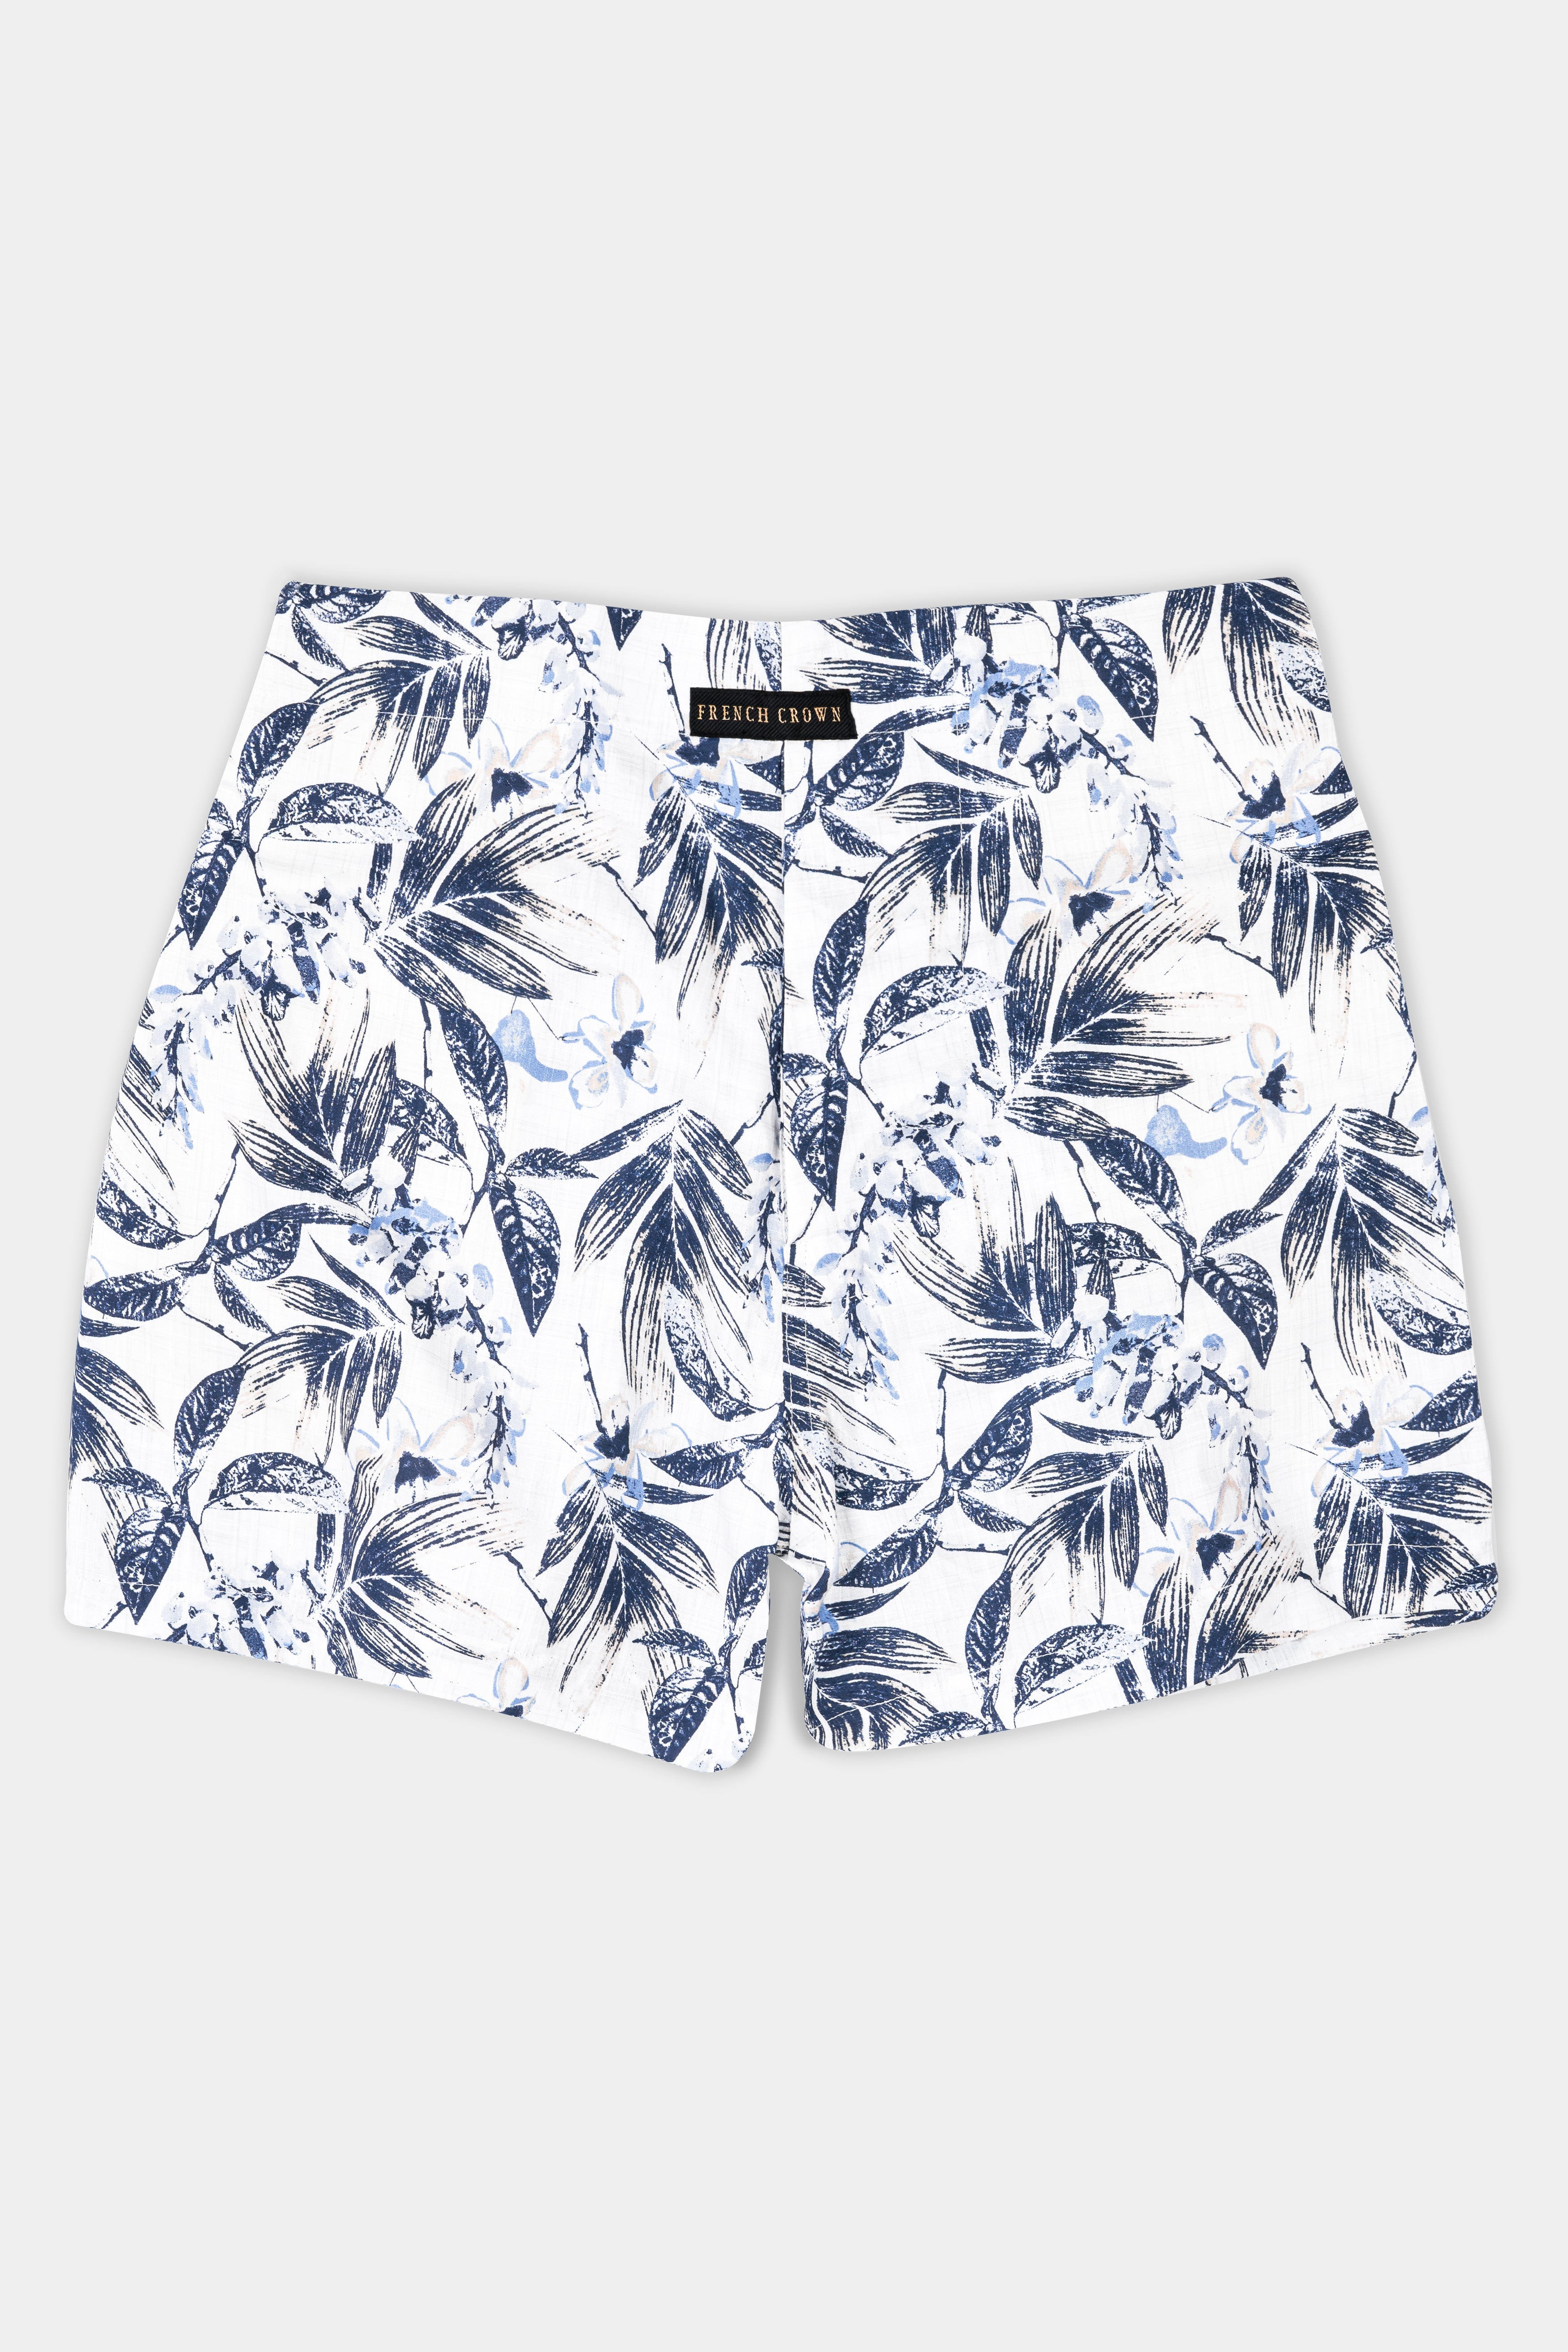 Glacier Blue With White Ditsy Printed Premium Tencel and Bright White with Rhino Blue Leaves Printed Dobby Textured Giza Cotton Boxers BX547-BX550-28, BX547-BX550-30, BX547-BX550-32, BX547-BX550-34, BX547-BX550-36, BX547-BX550-38, BX547-BX550-40, BX547-BX550-42, BX547-BX550-44